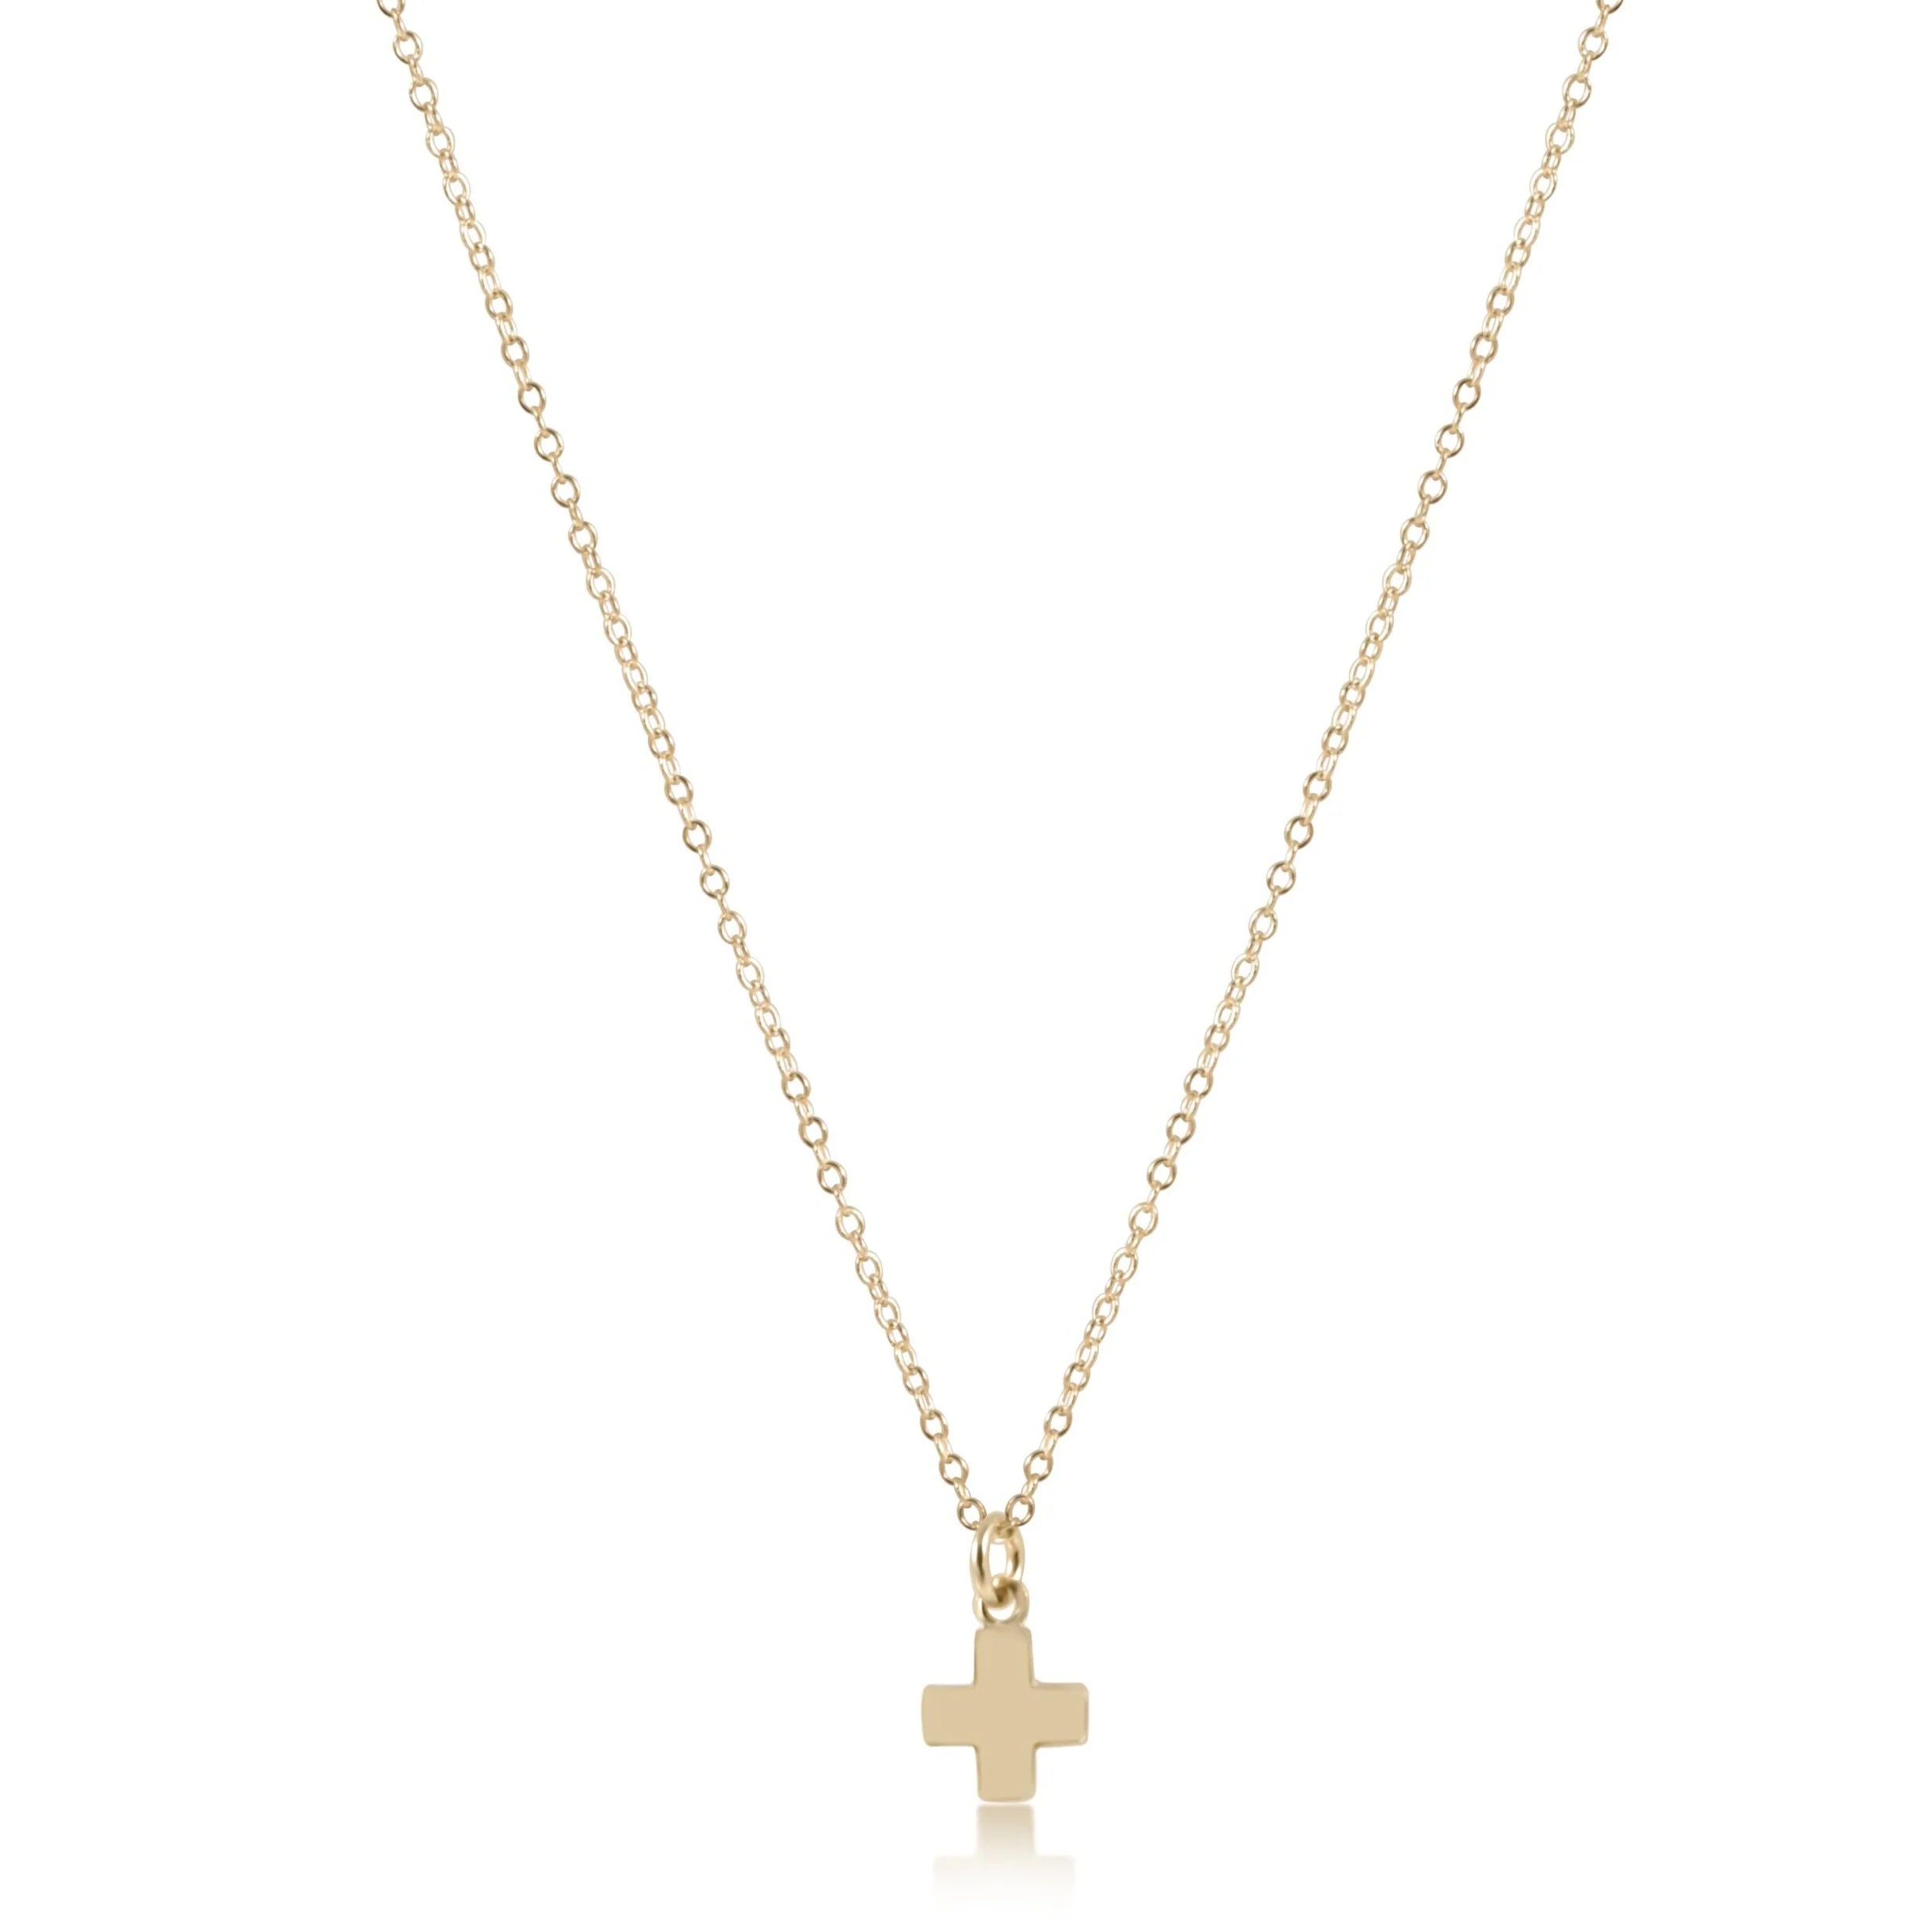 16" Necklace Gold -Signature Cross Small Gold Charm